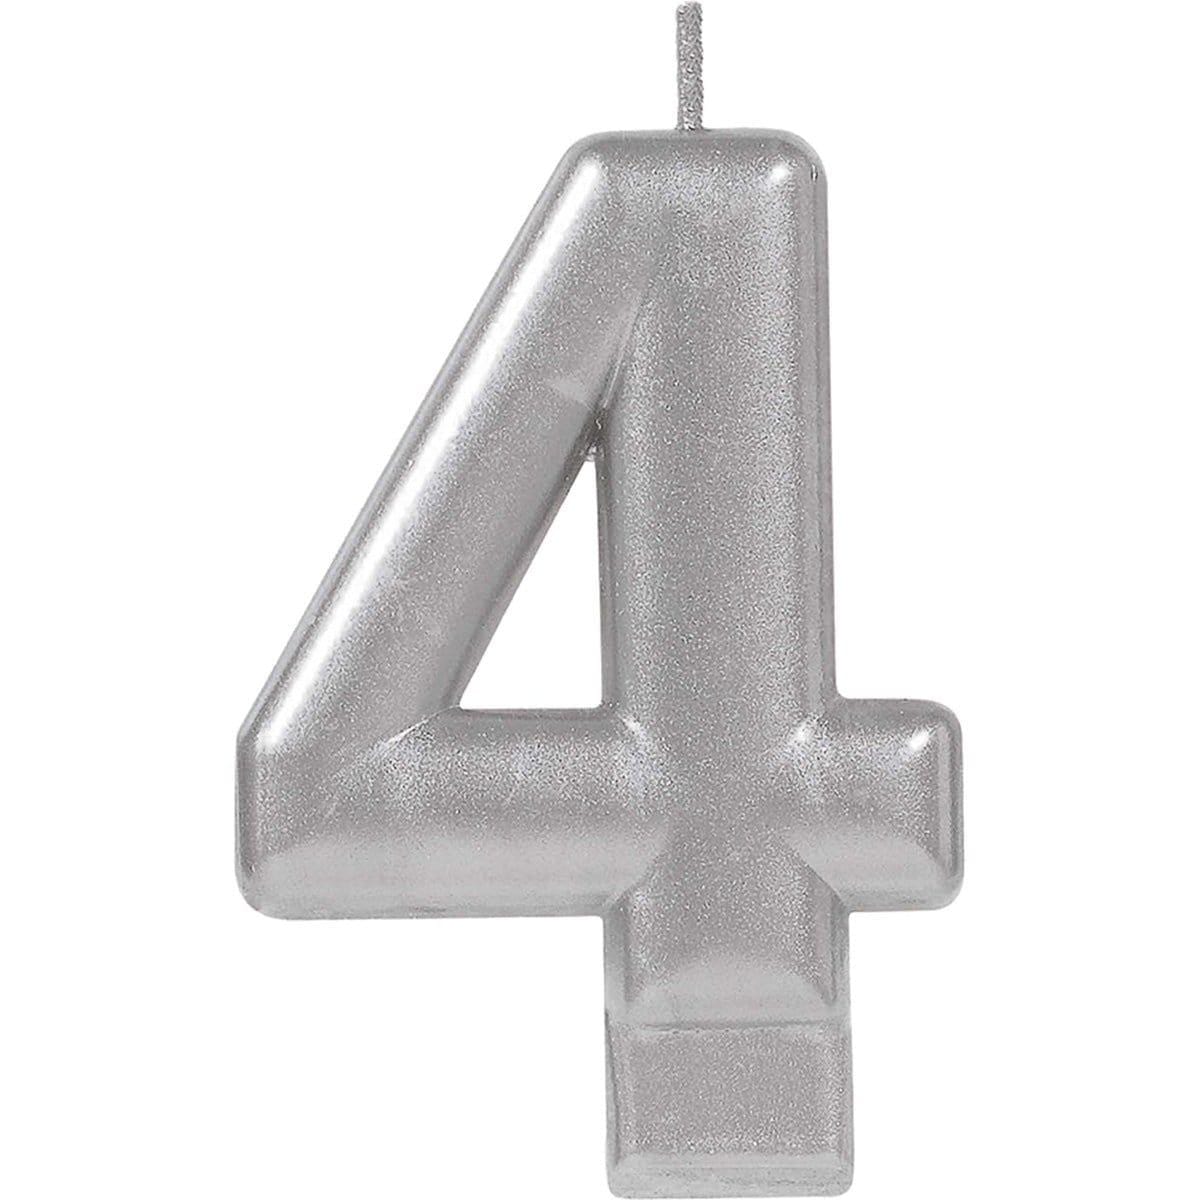 Buy Cake Supplies Metallic Numeral Candle #4 - Silver sold at Party Expert